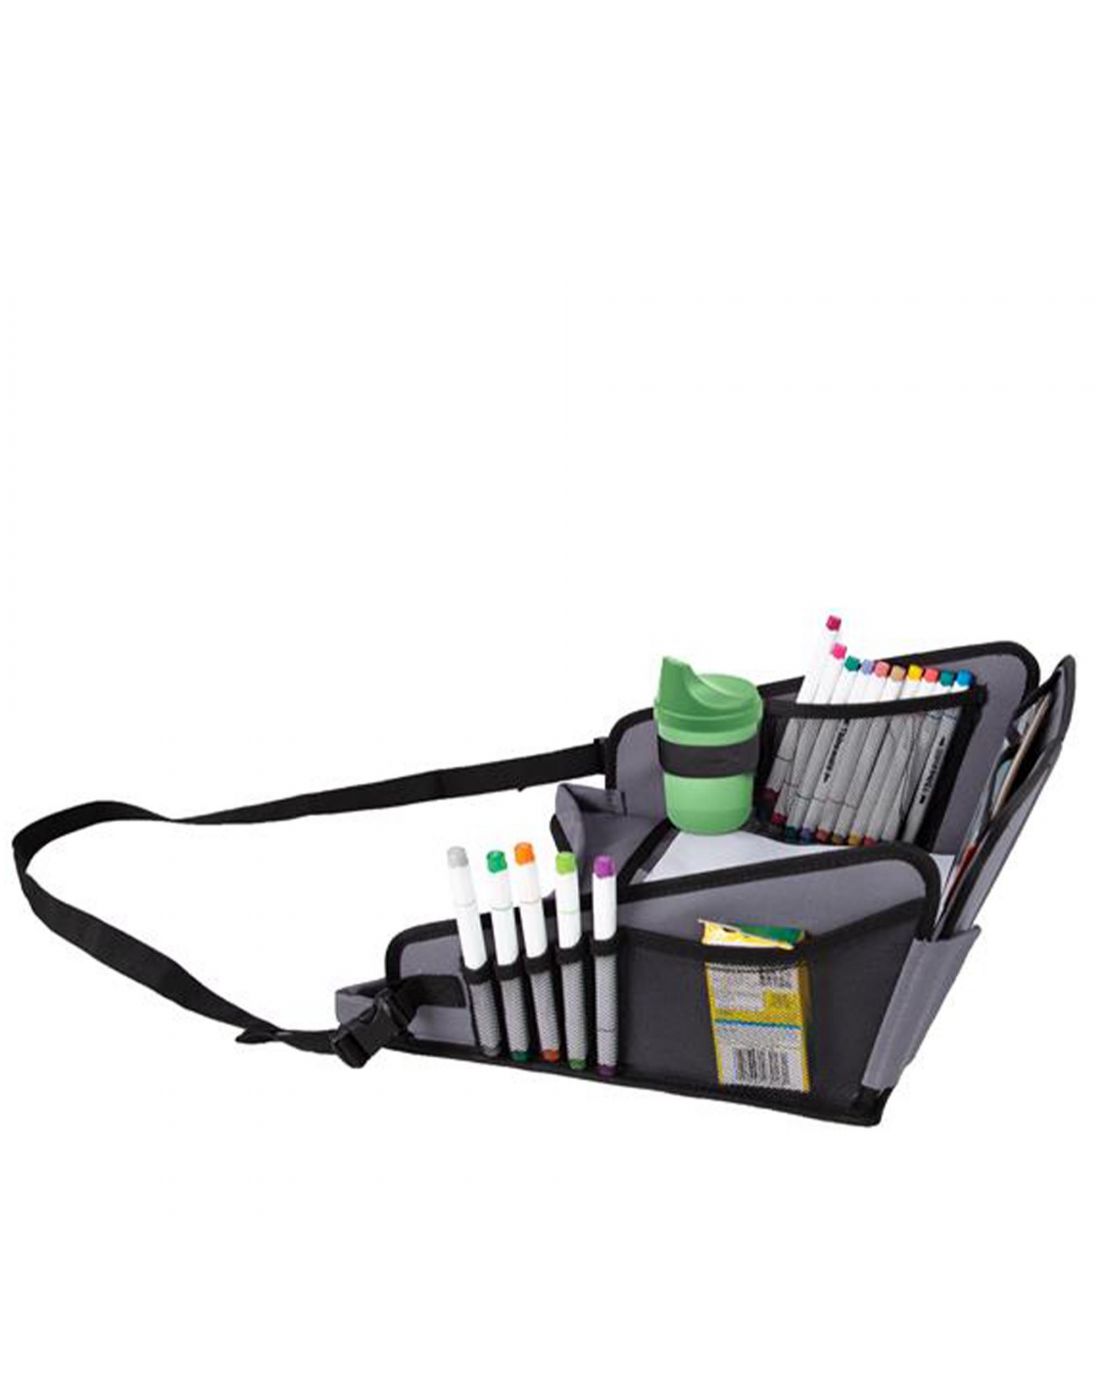 Dreambaby Travel pad incl. tablet holder